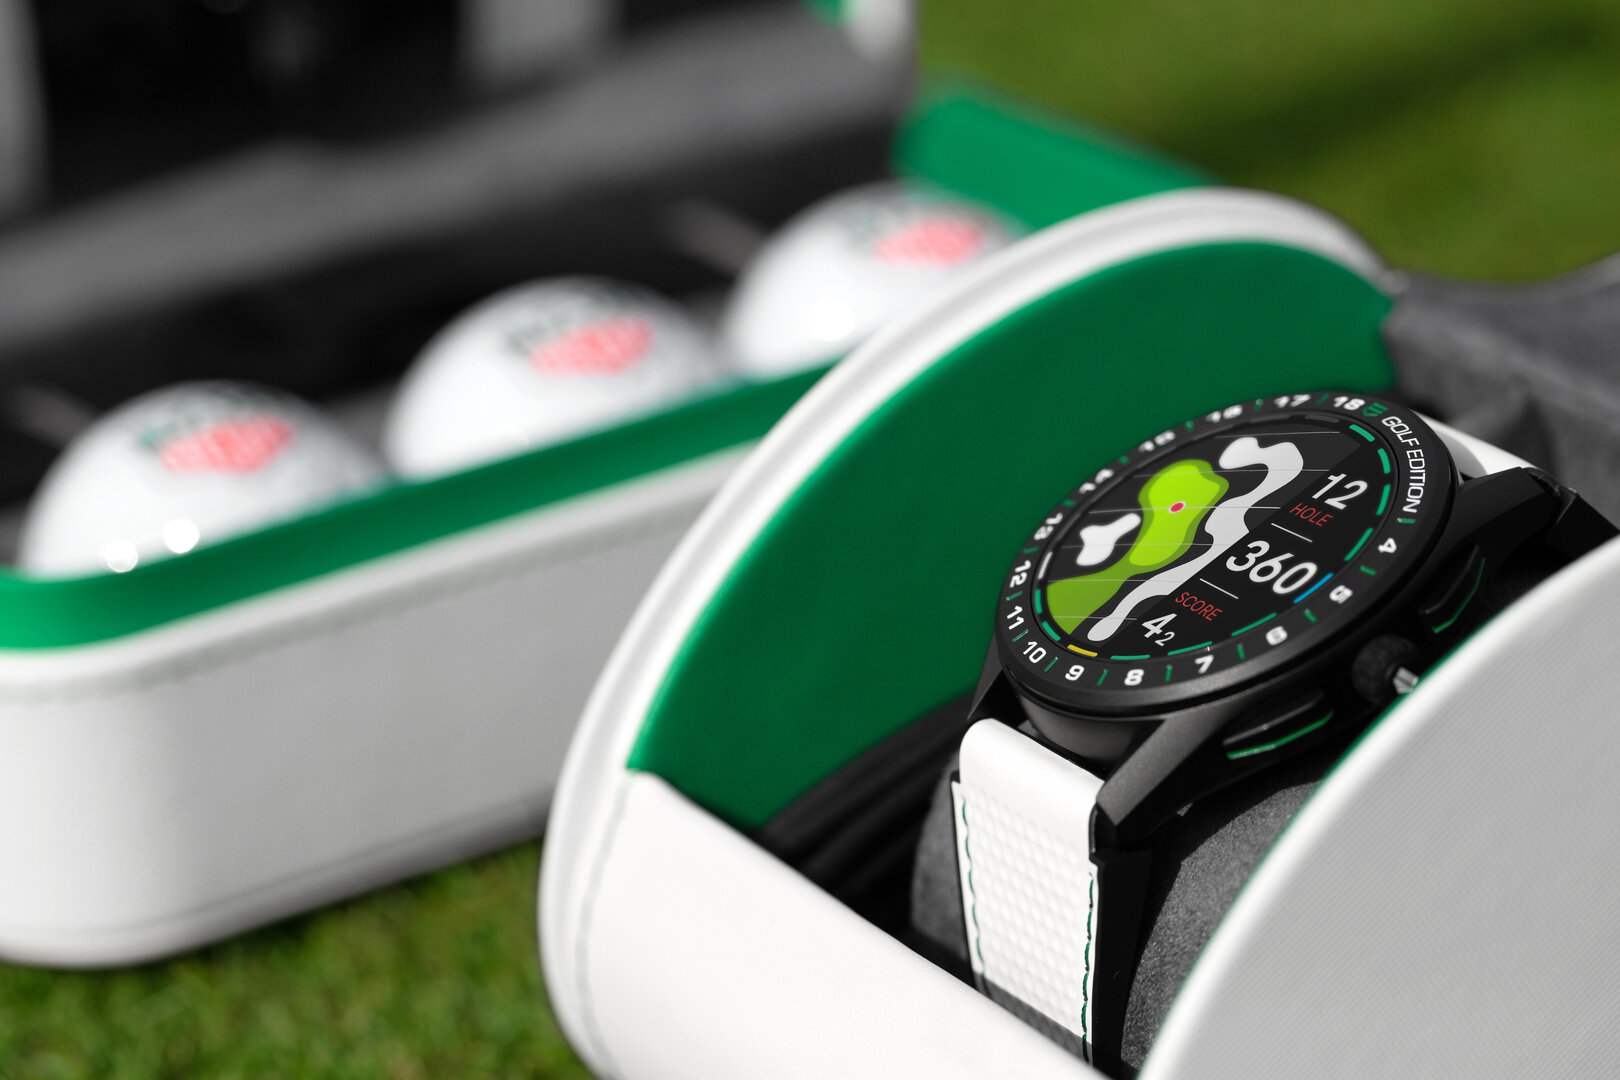 TAG Heuer Connected Golf-Edition